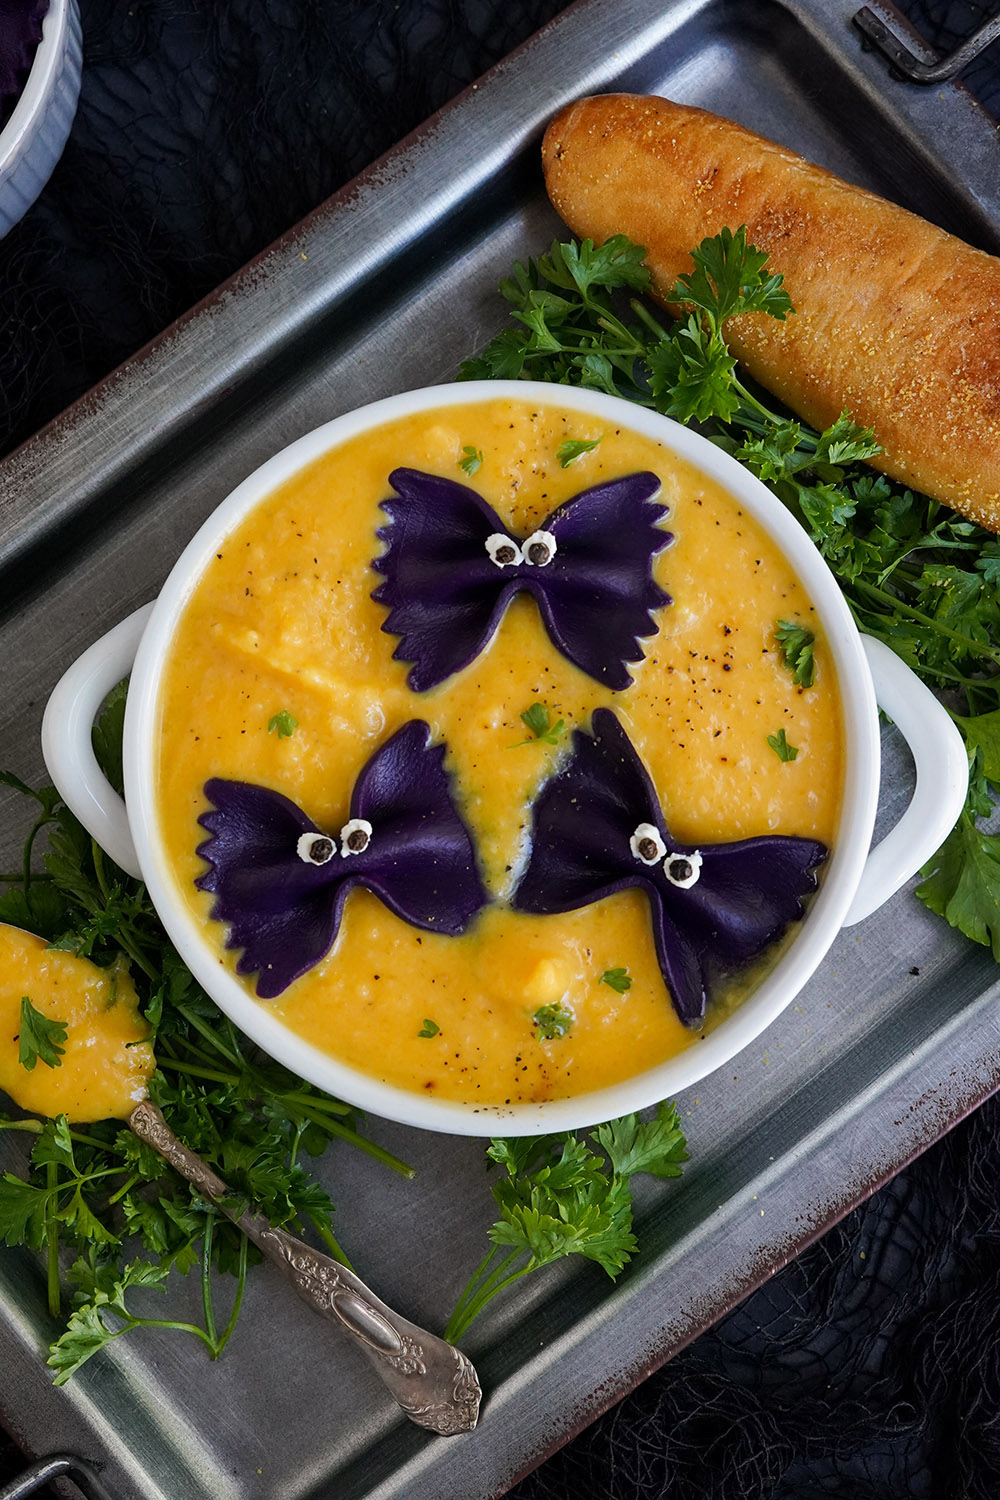 Soup with pasta bats in it for Halloween.